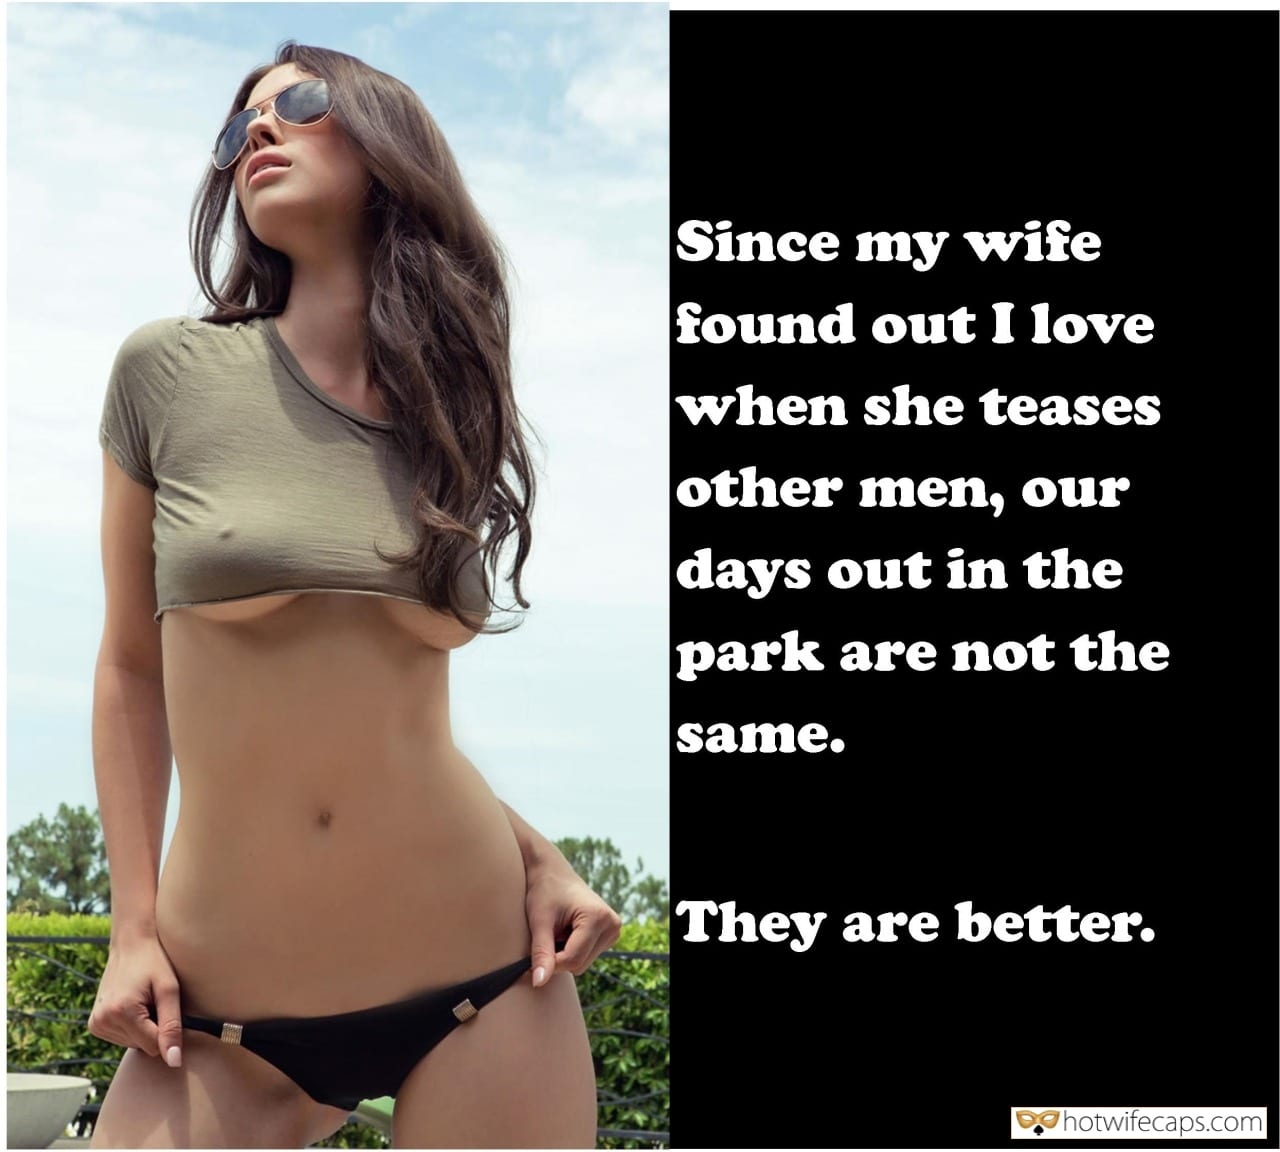 Vacation Sexy Memes Public Flashing hotwife caption: Since my wife found out I love it when she teases other men, our days out in the park are not the same. They are better. Sexy Brunette Wife Underboobs and Pokies